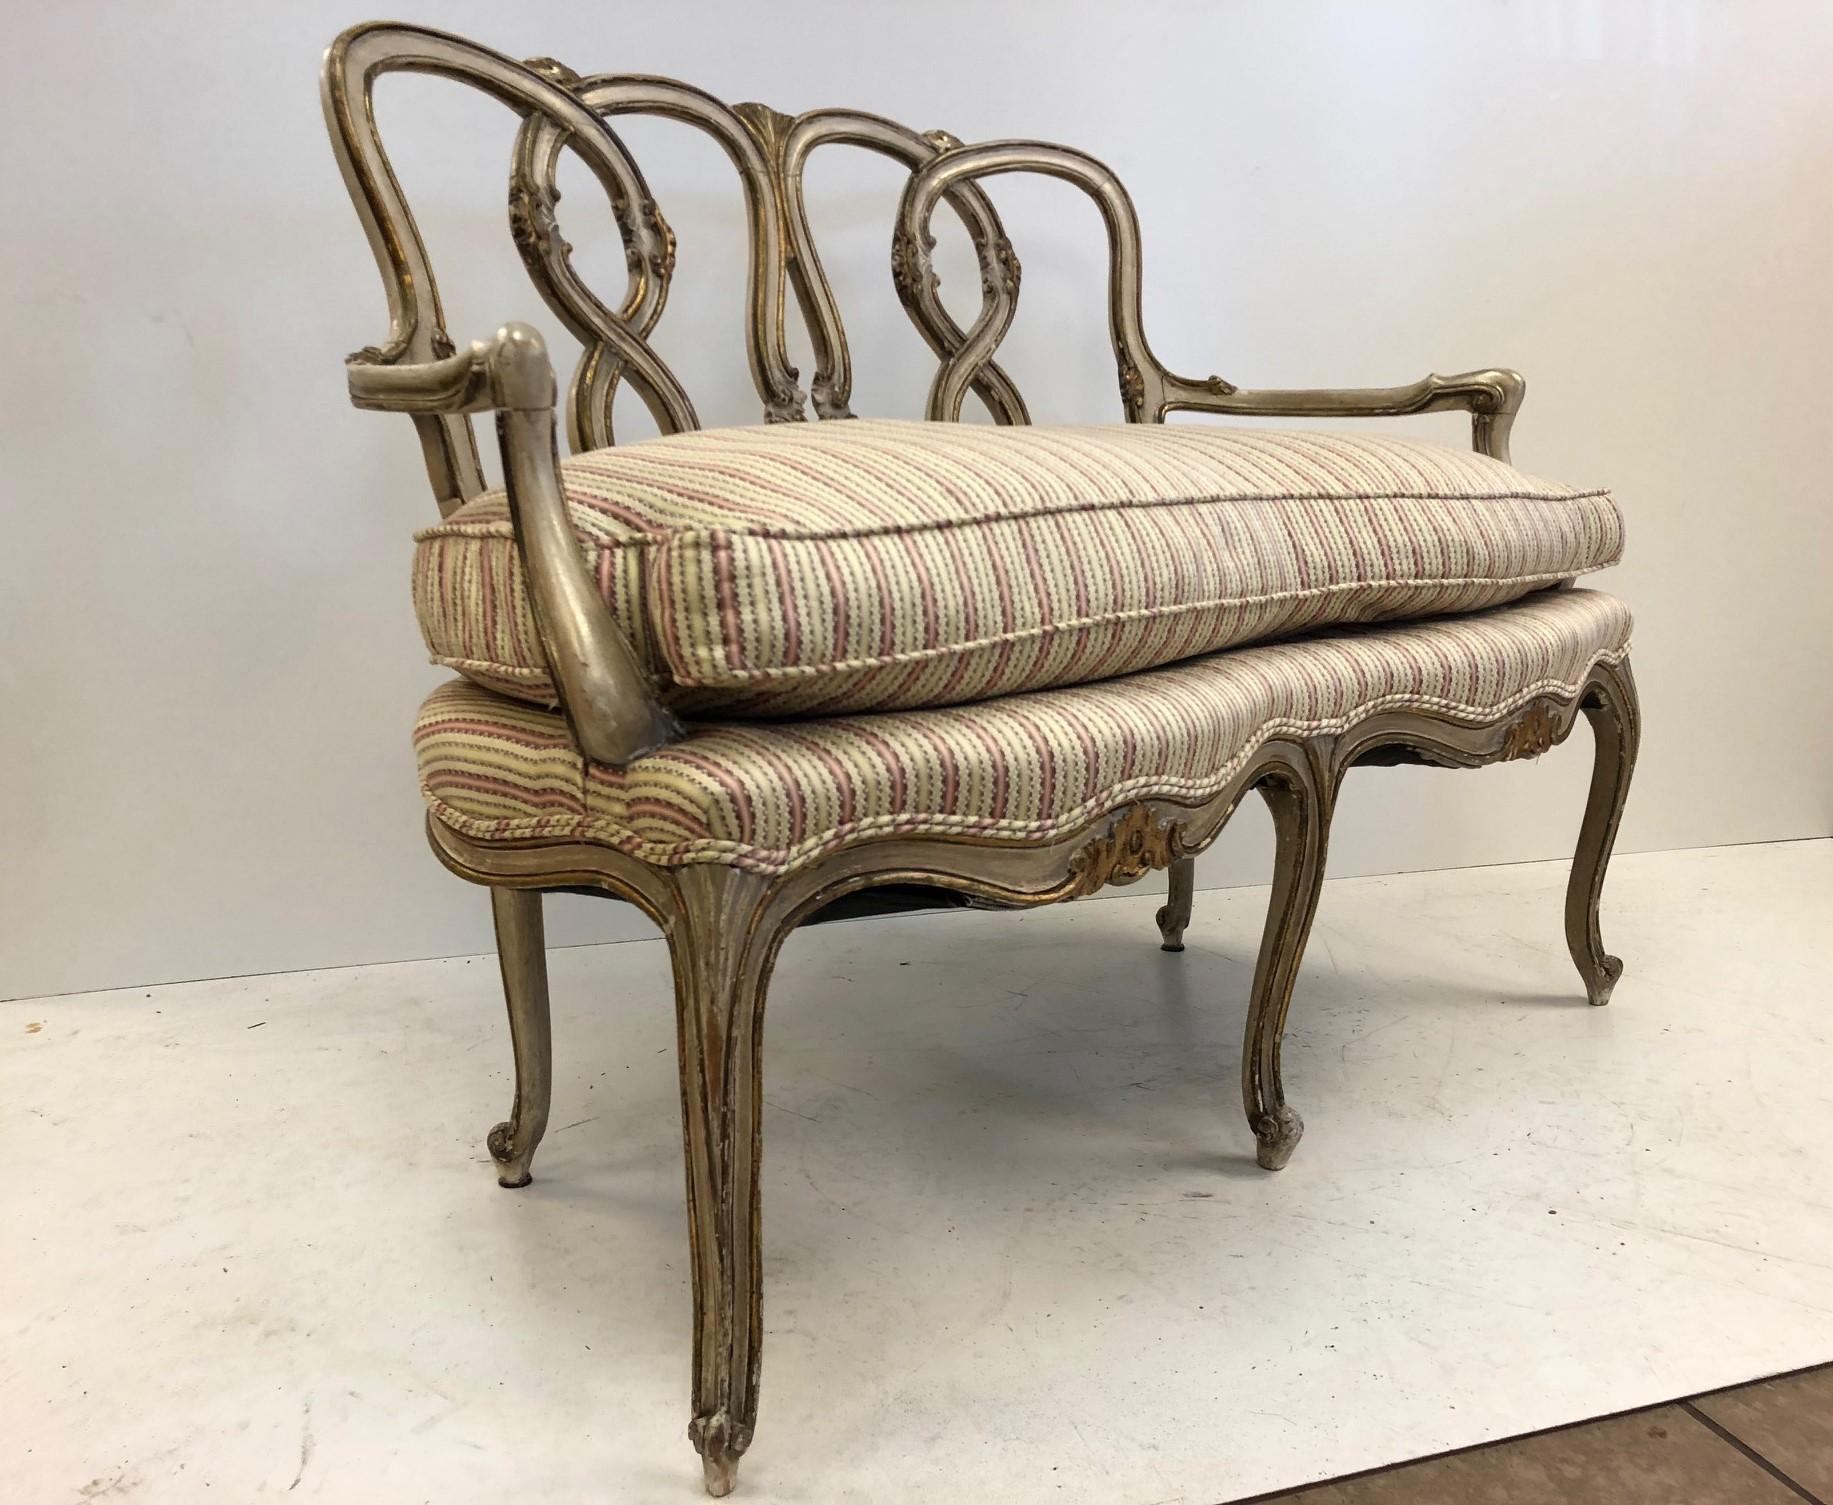 Pair of Rococo style parcel-gilt painted settees. Original seat upholstery and down filled.